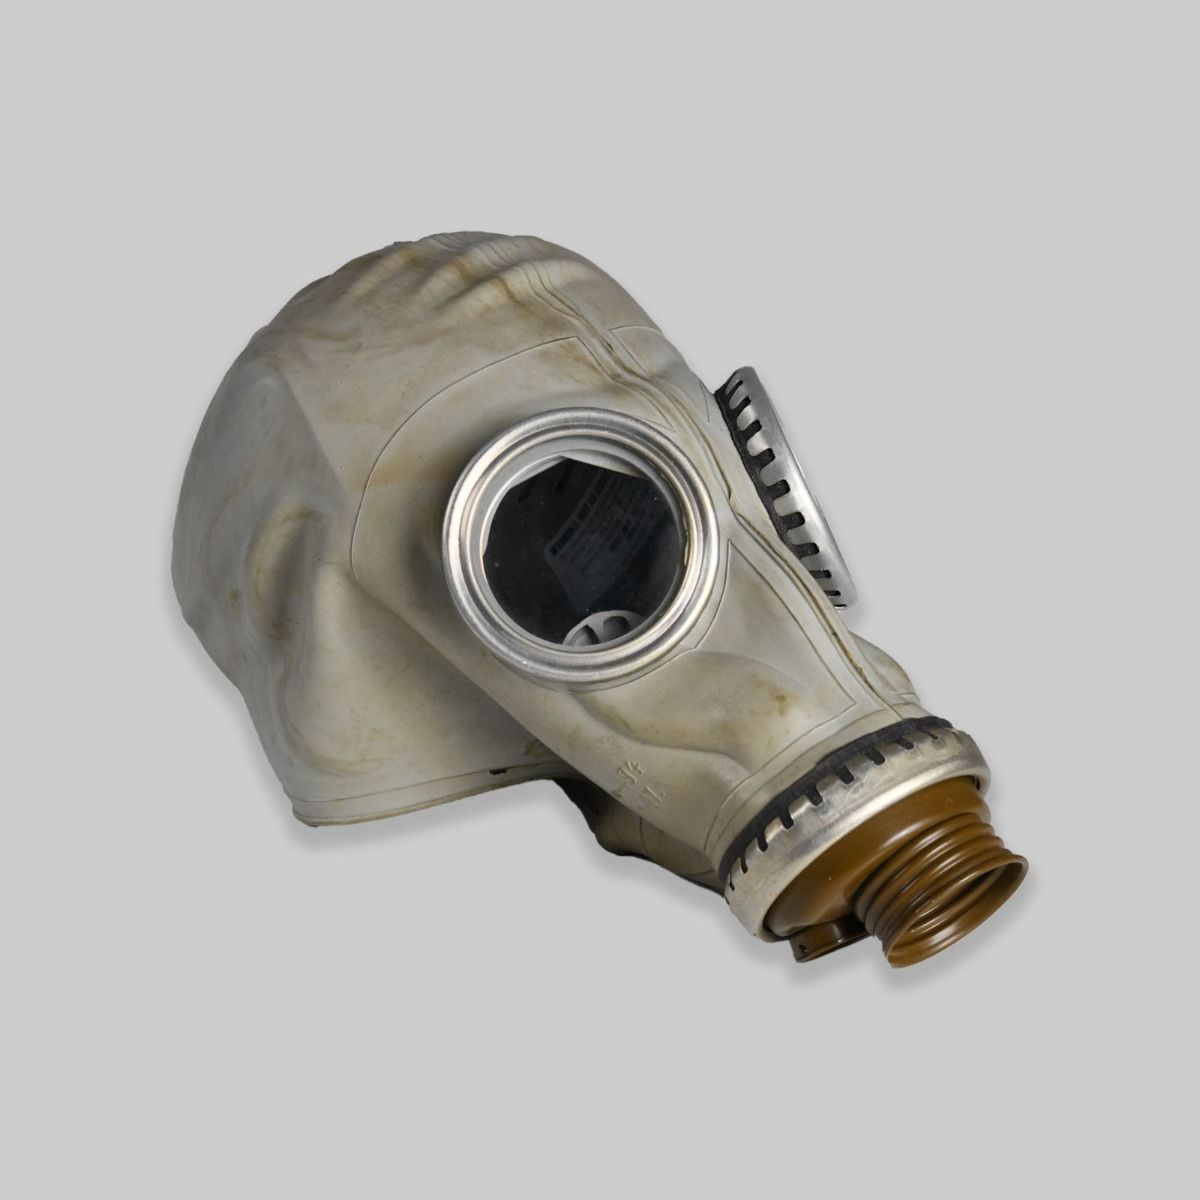 Vintage Russian Military GP-5 Gas Mask